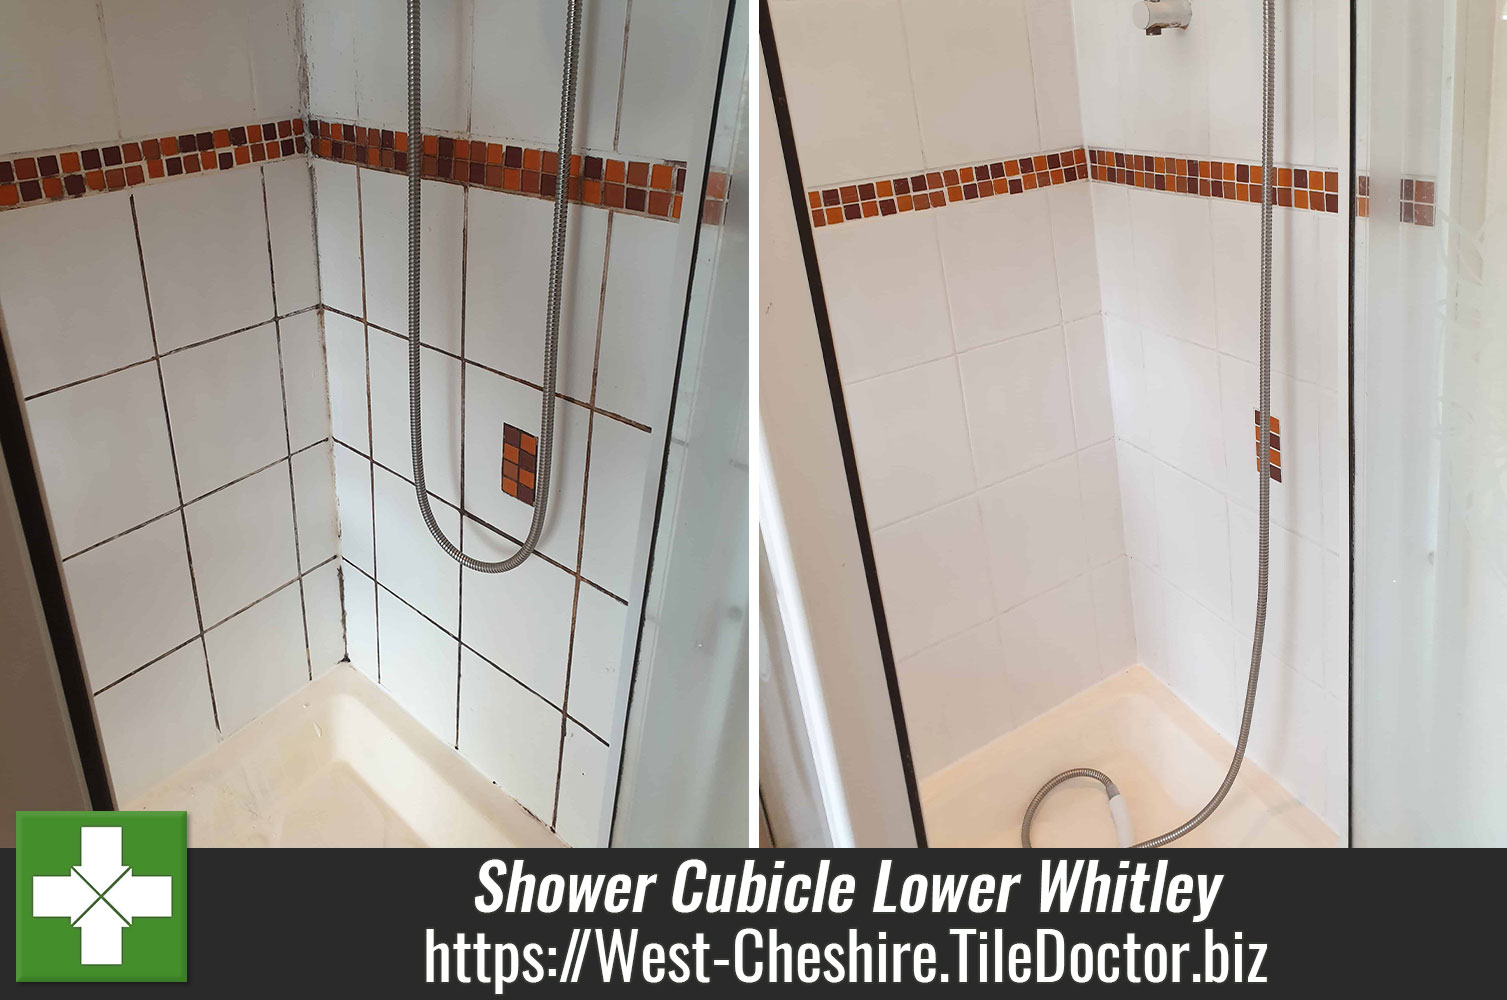 Deep Cleaning Shower Ceramic Cubicle Tile and Grout in Lower Whitley - West  Cheshire Tile Doctor